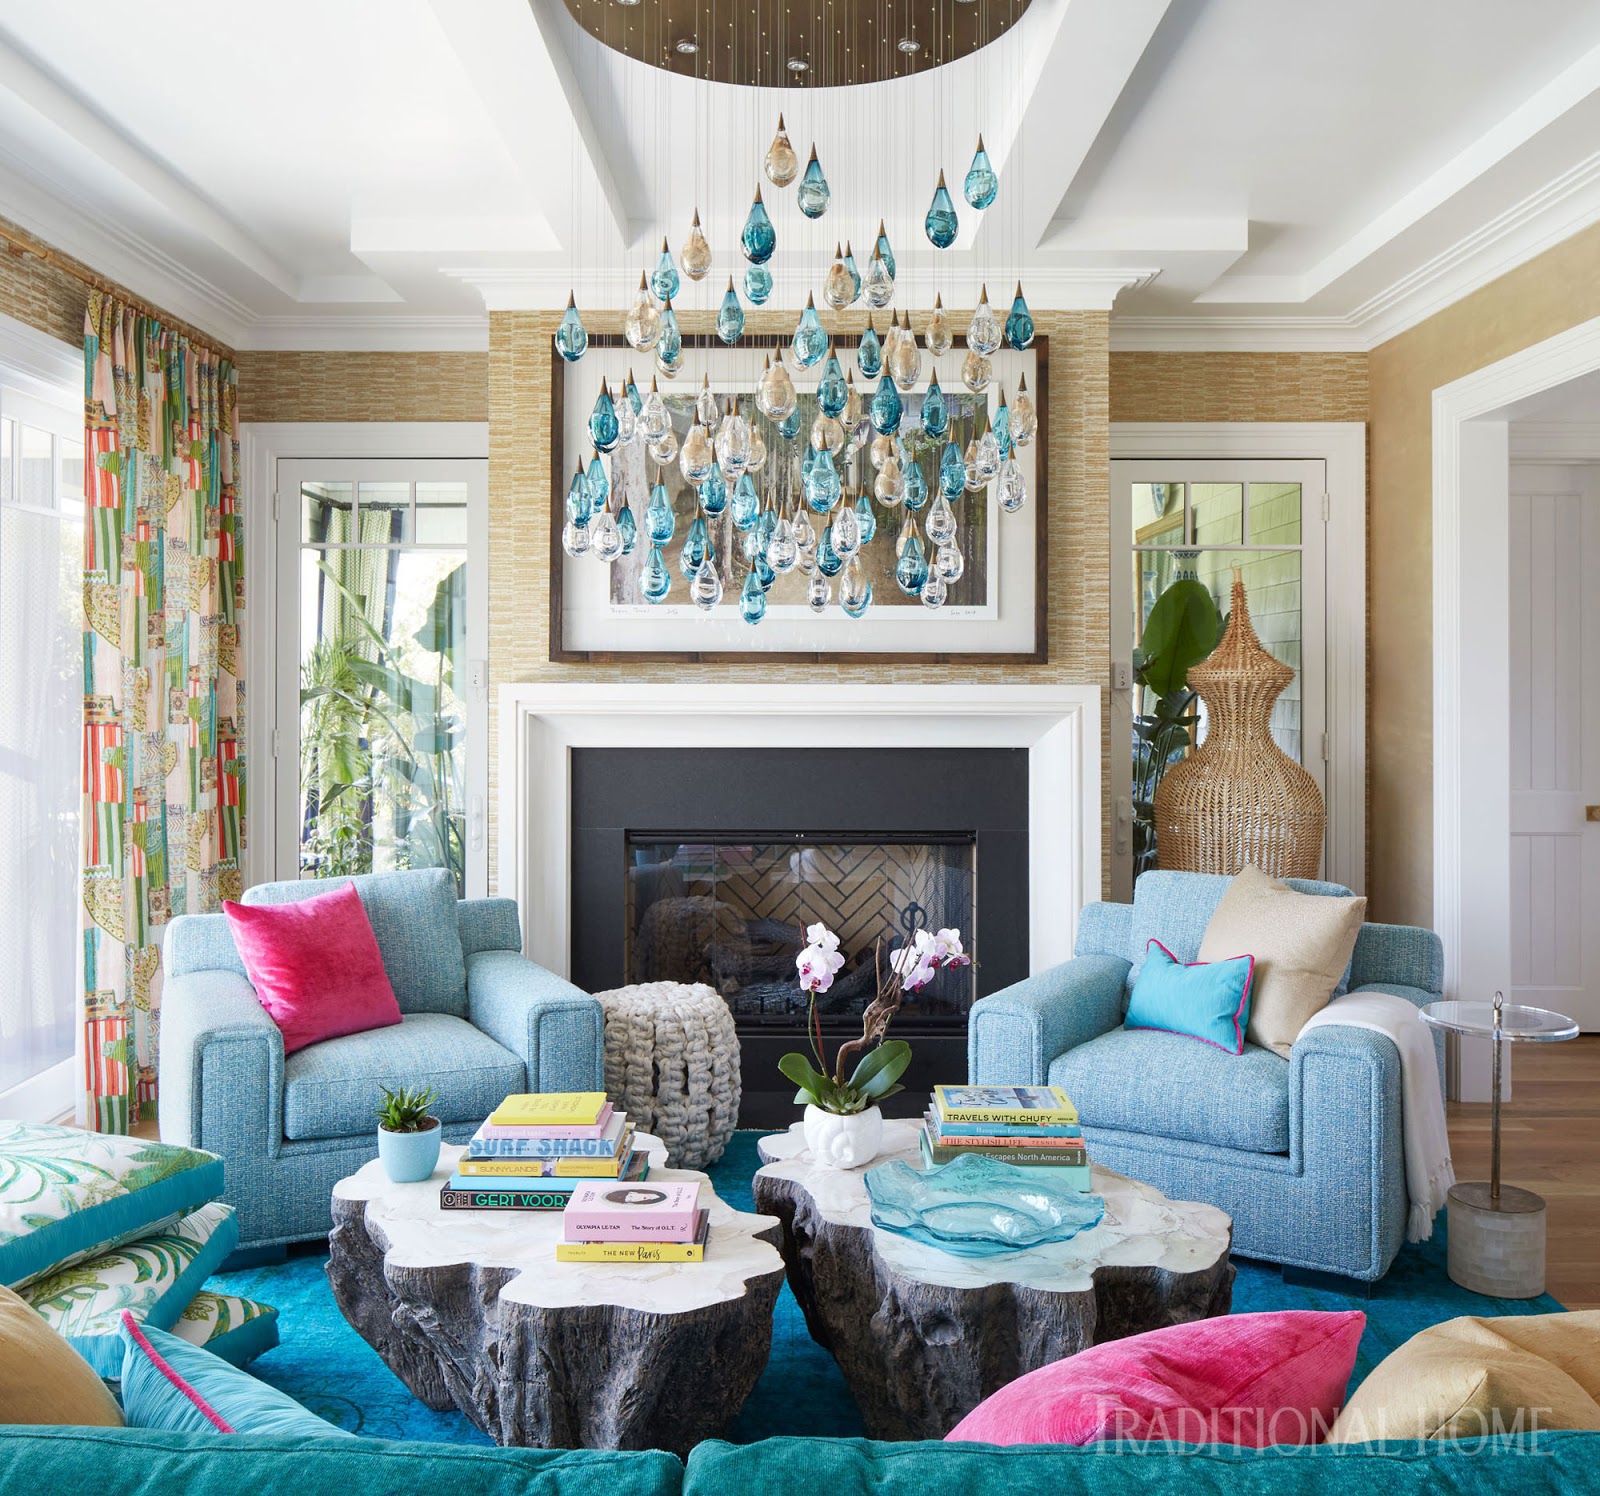 Home Sweet Home: It's all about COLOR!